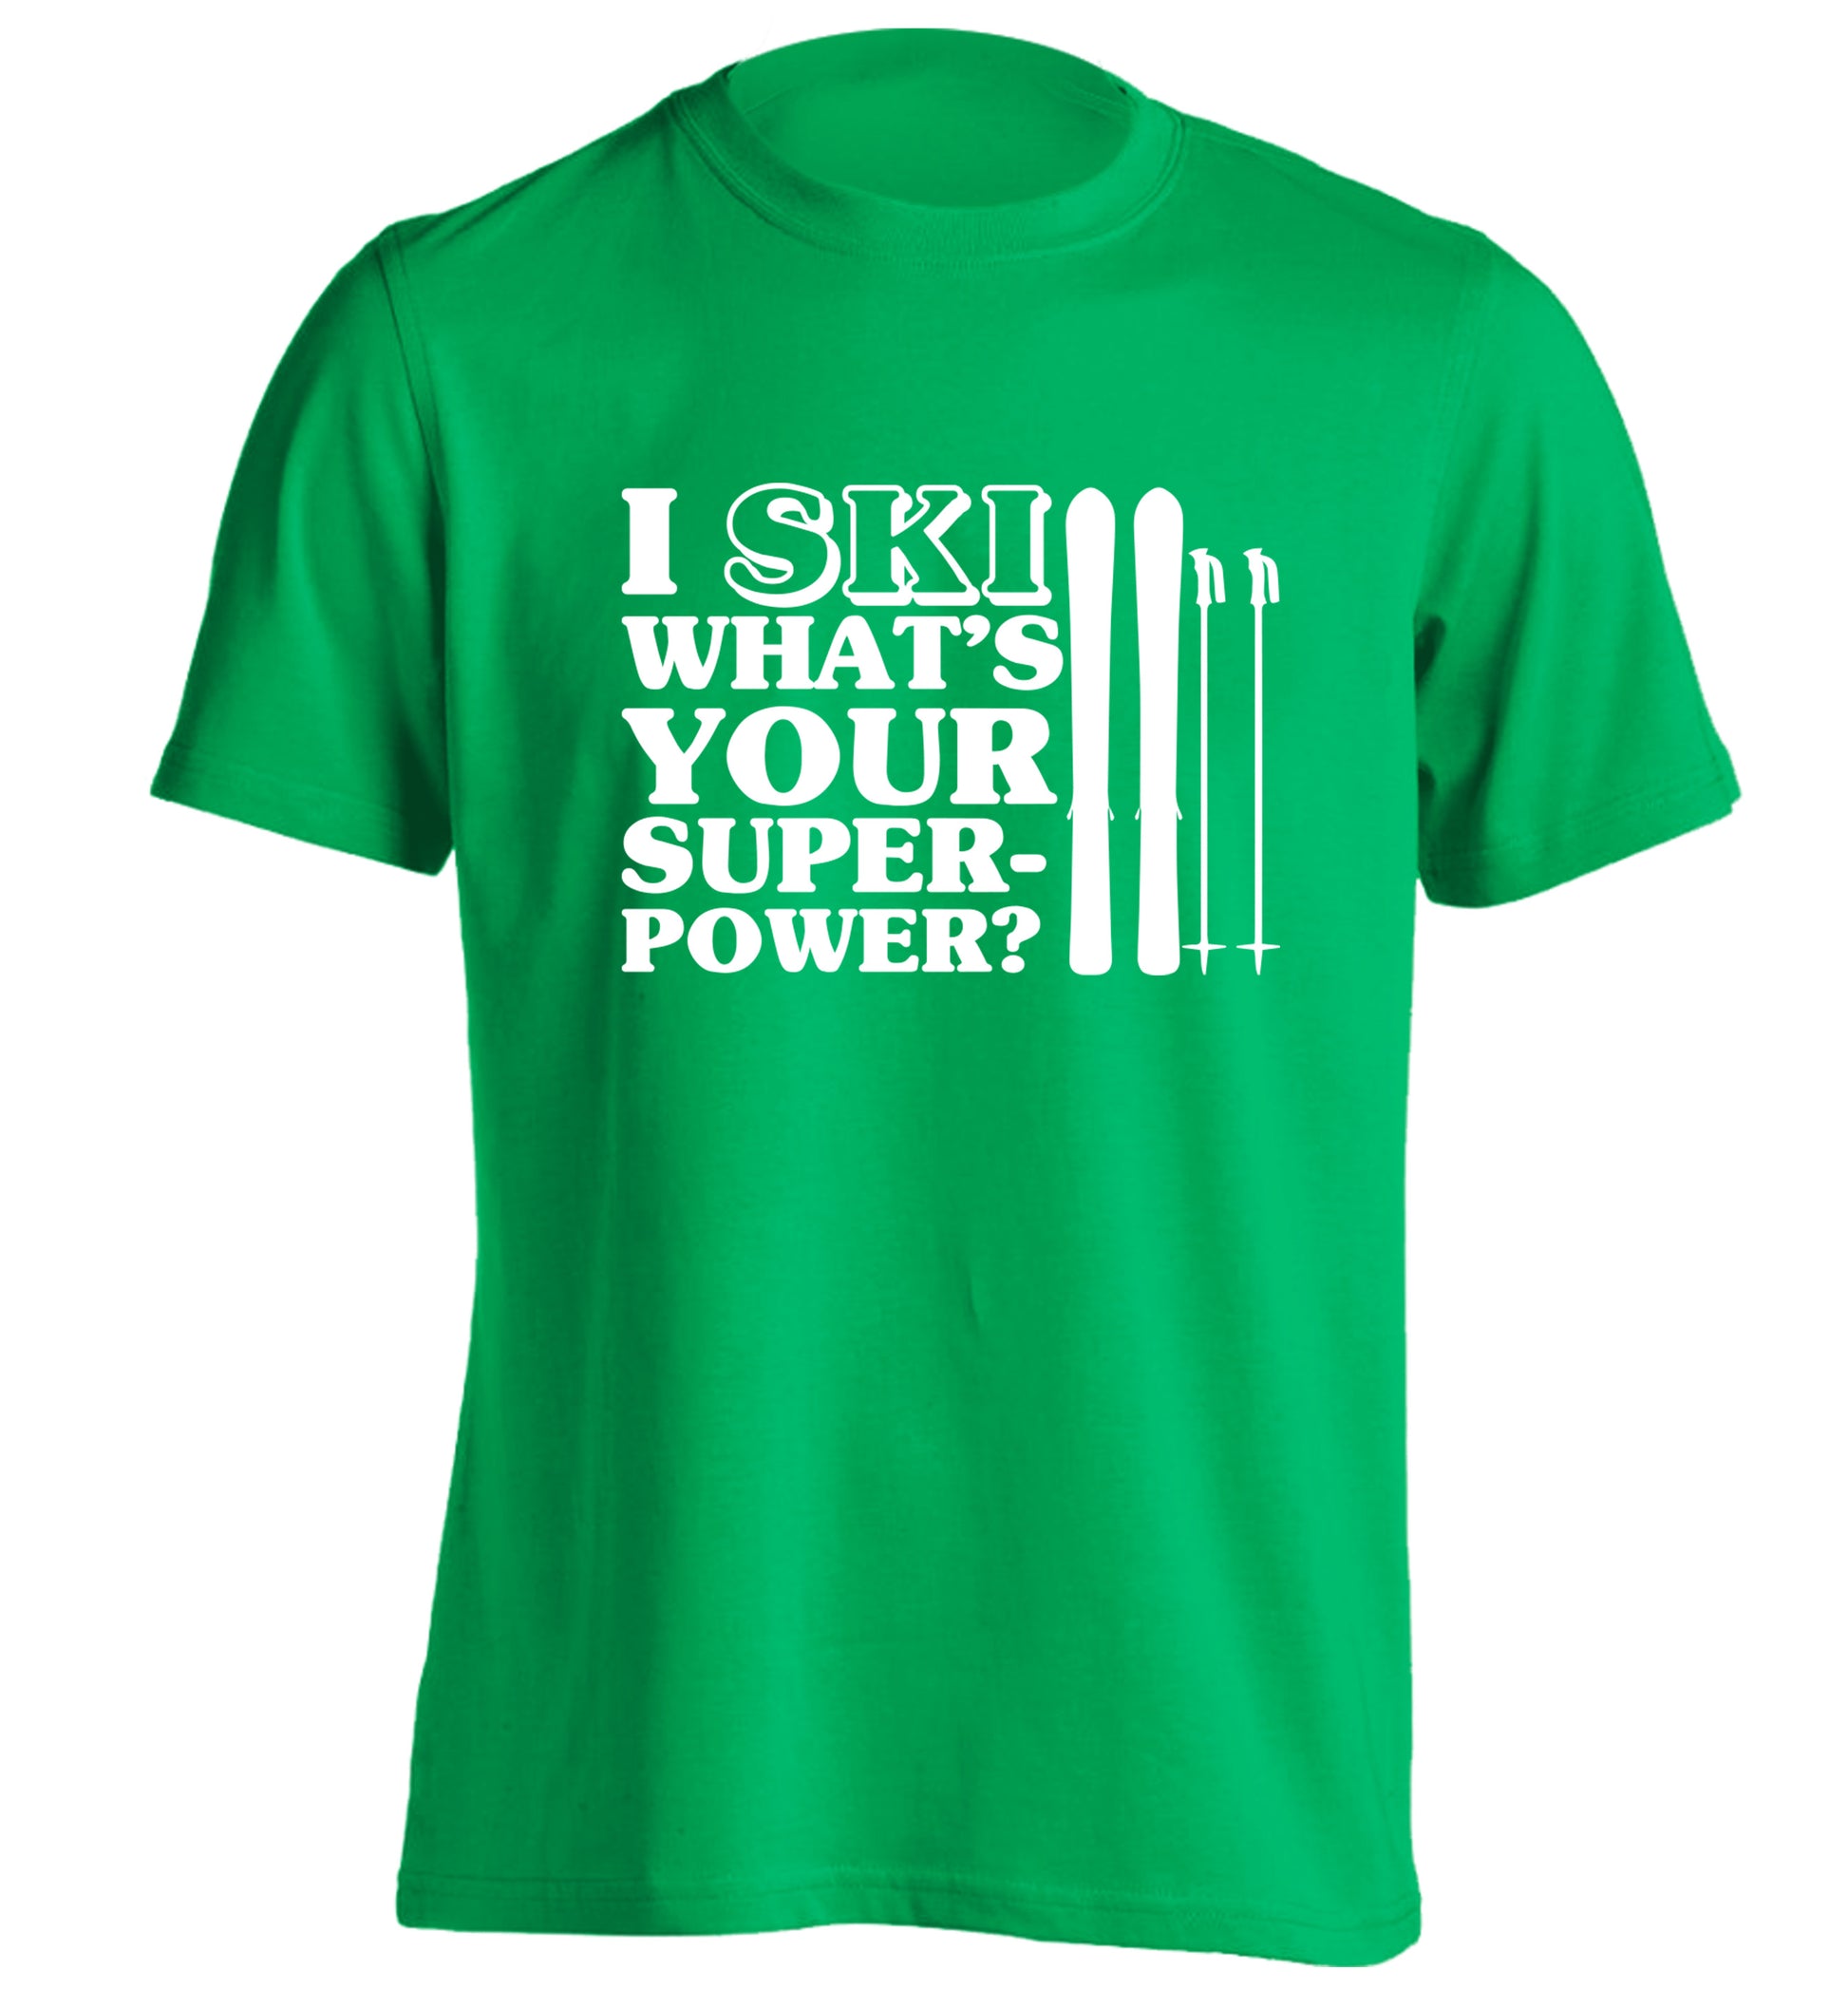 I ski what's your superpower? adults unisexgreen Tshirt 2XL